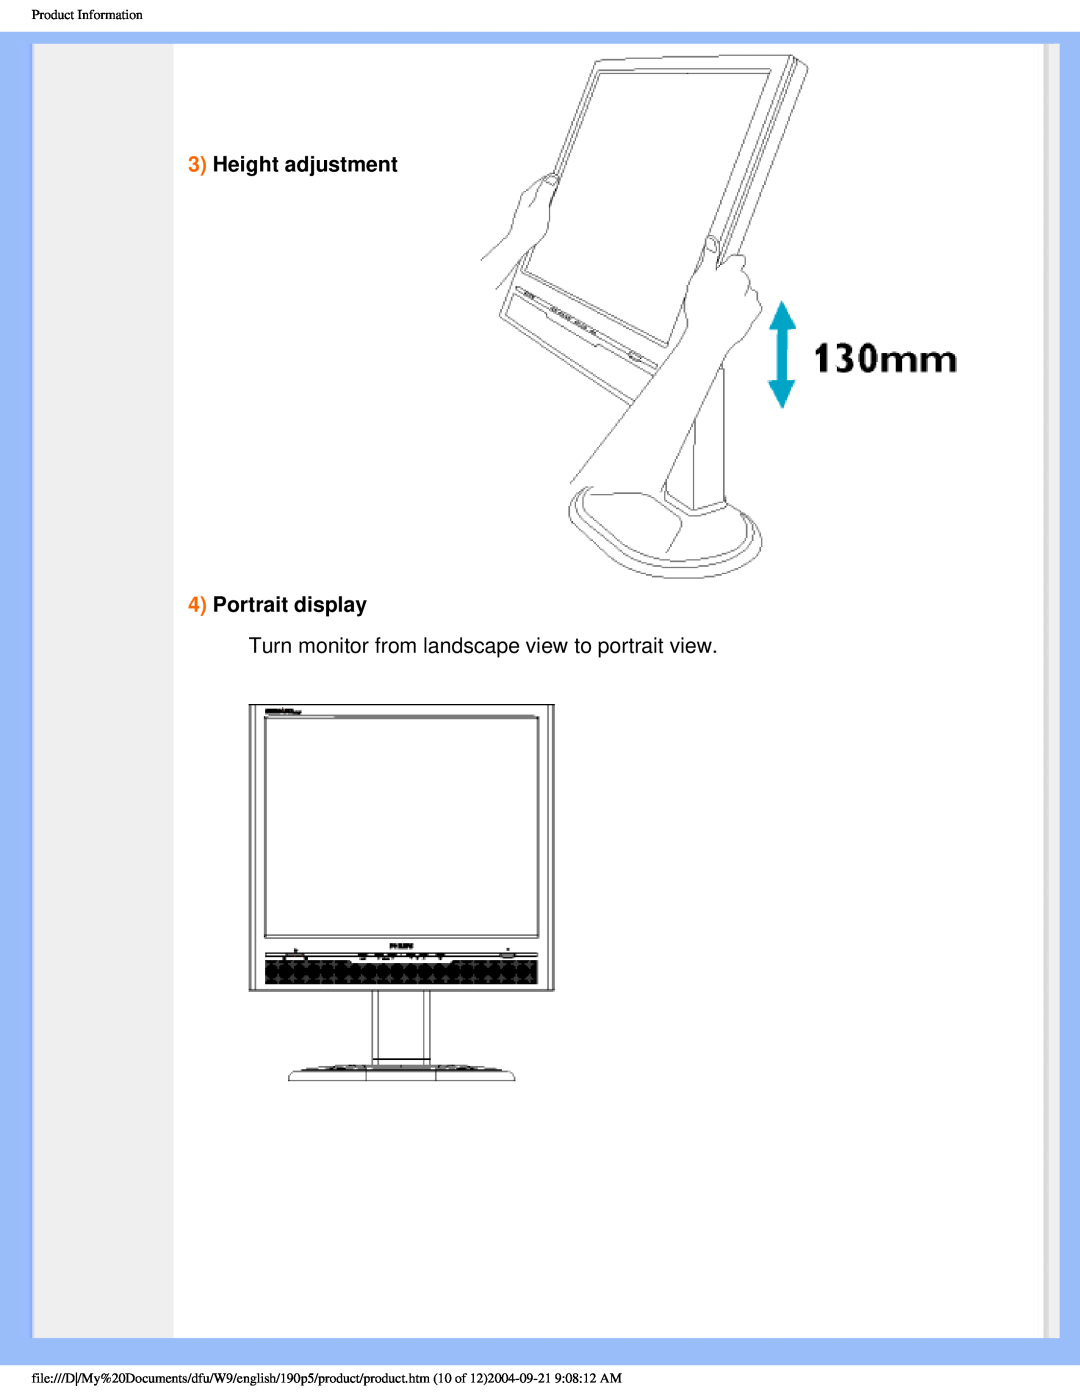 Philips 190PS Height adjustment 4 Portrait display, Turn monitor from landscape view to portrait view, Product Information 